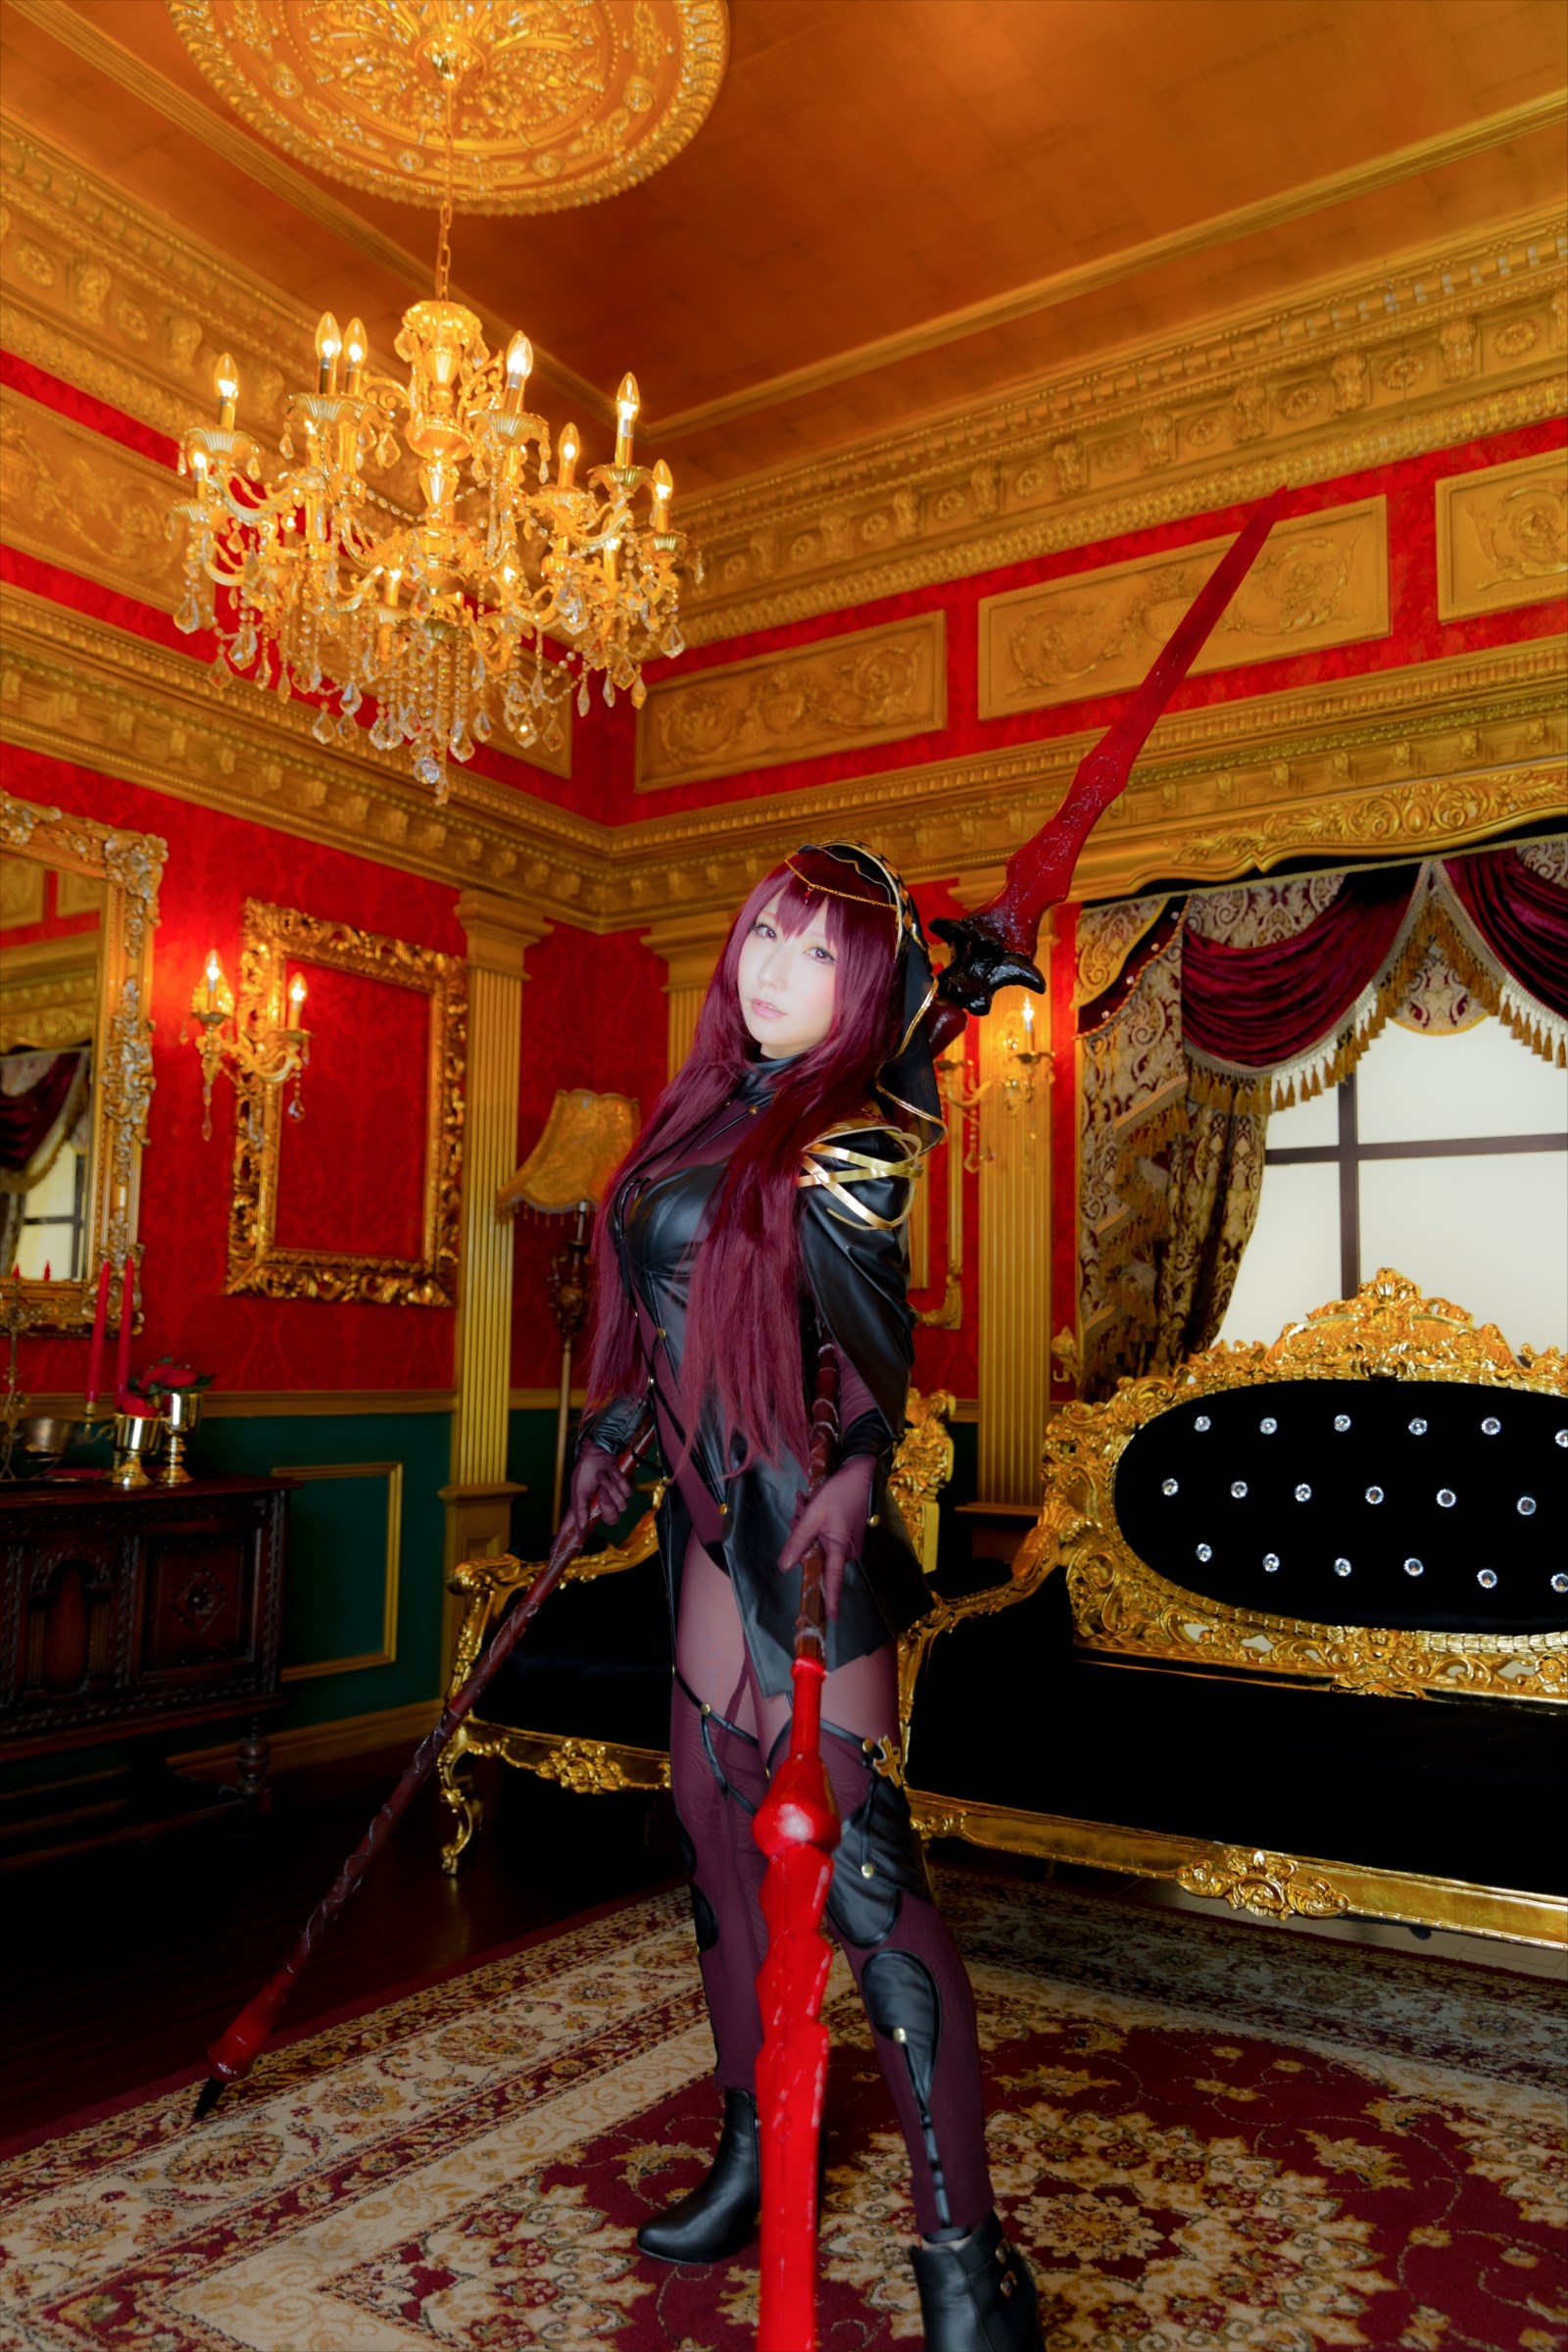 cos (Cosplay)(C92) Shooting Star (サク) Shadow Queen 598MB1(98)